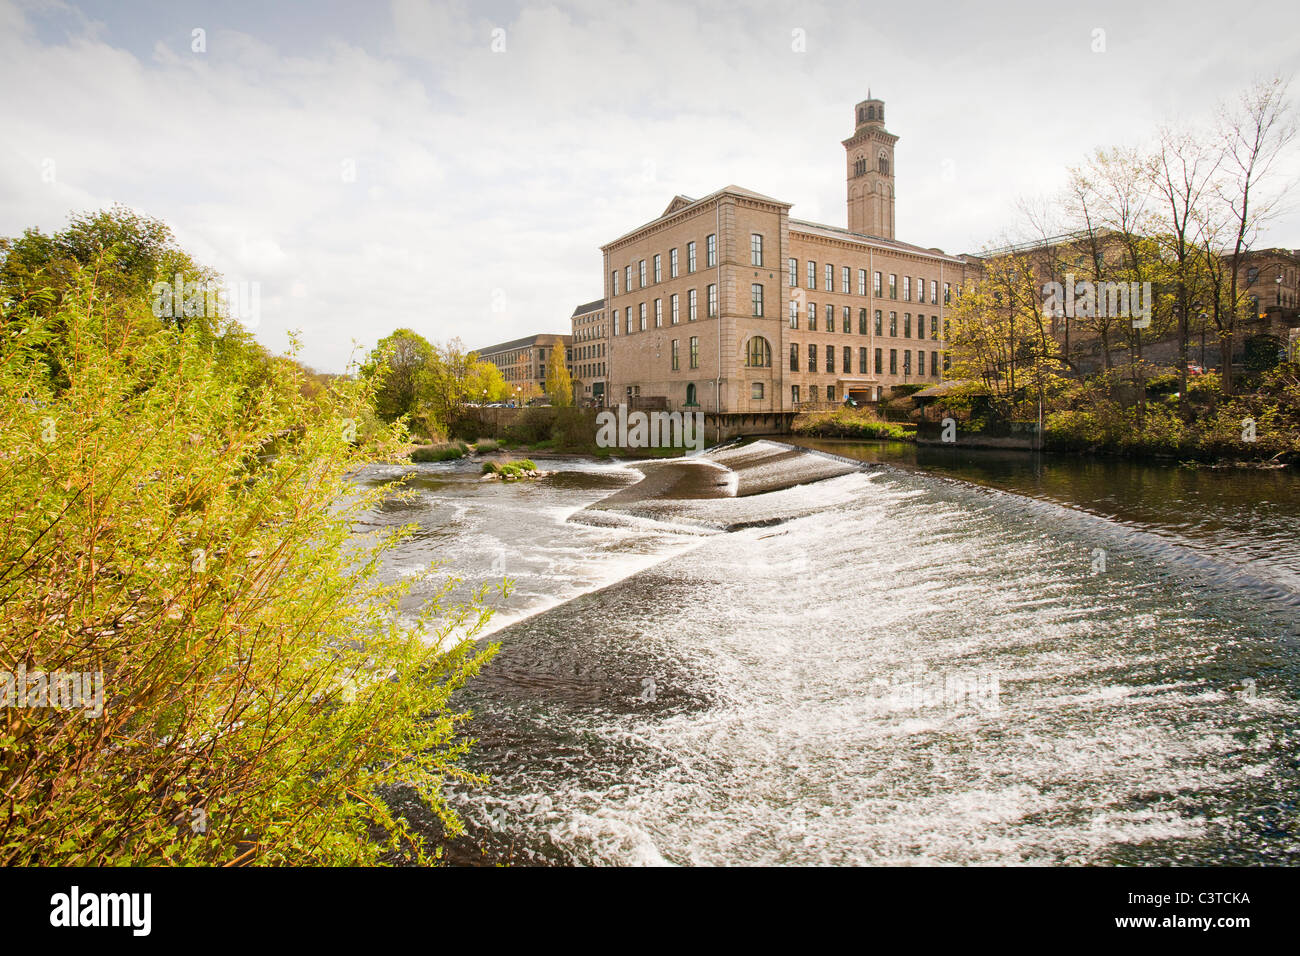 Salts mill in Saltaire, Yorkshire, UK and a weir on the River Aire. The mill was opened in 1853 by Titus Salt to process alpaca Stock Photo